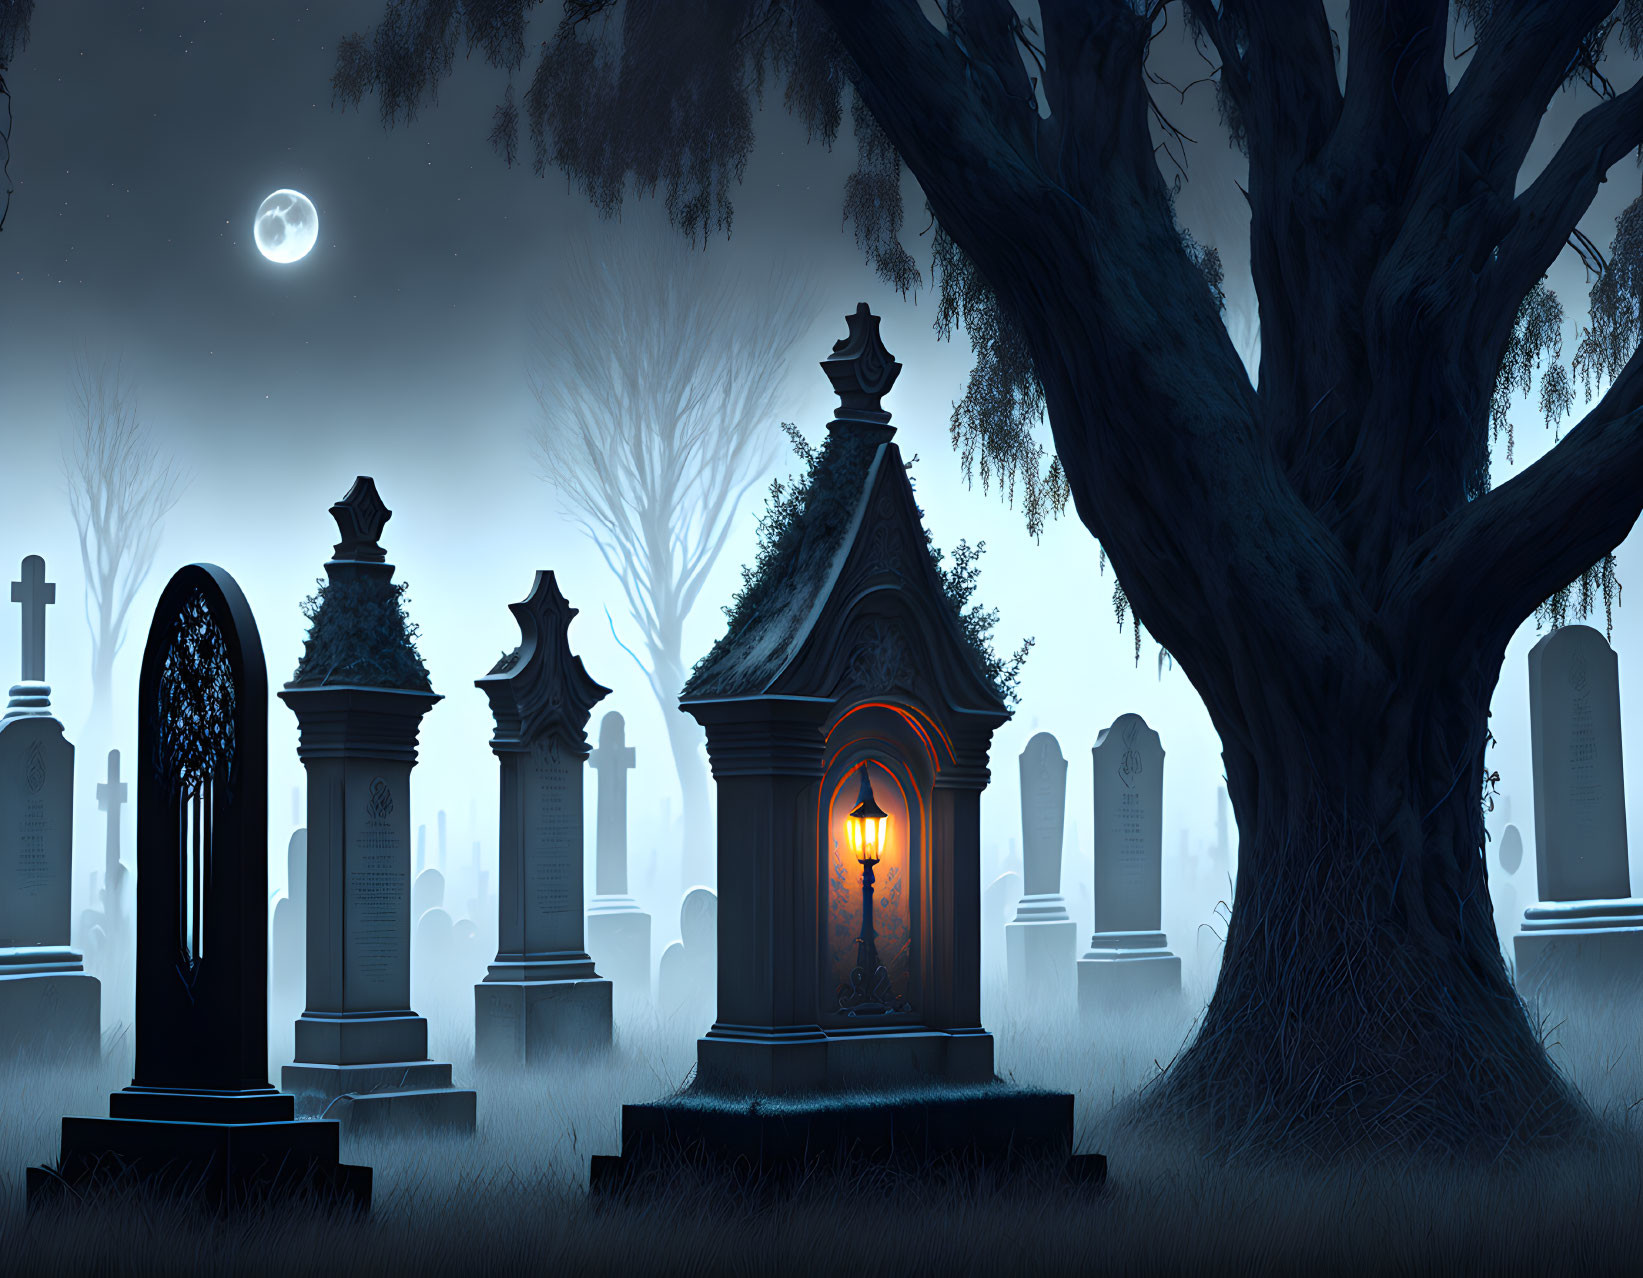 Moonlit Cemetery with Tombstones, Lit Mausoleum, and Misty Trees in Blue Atmos